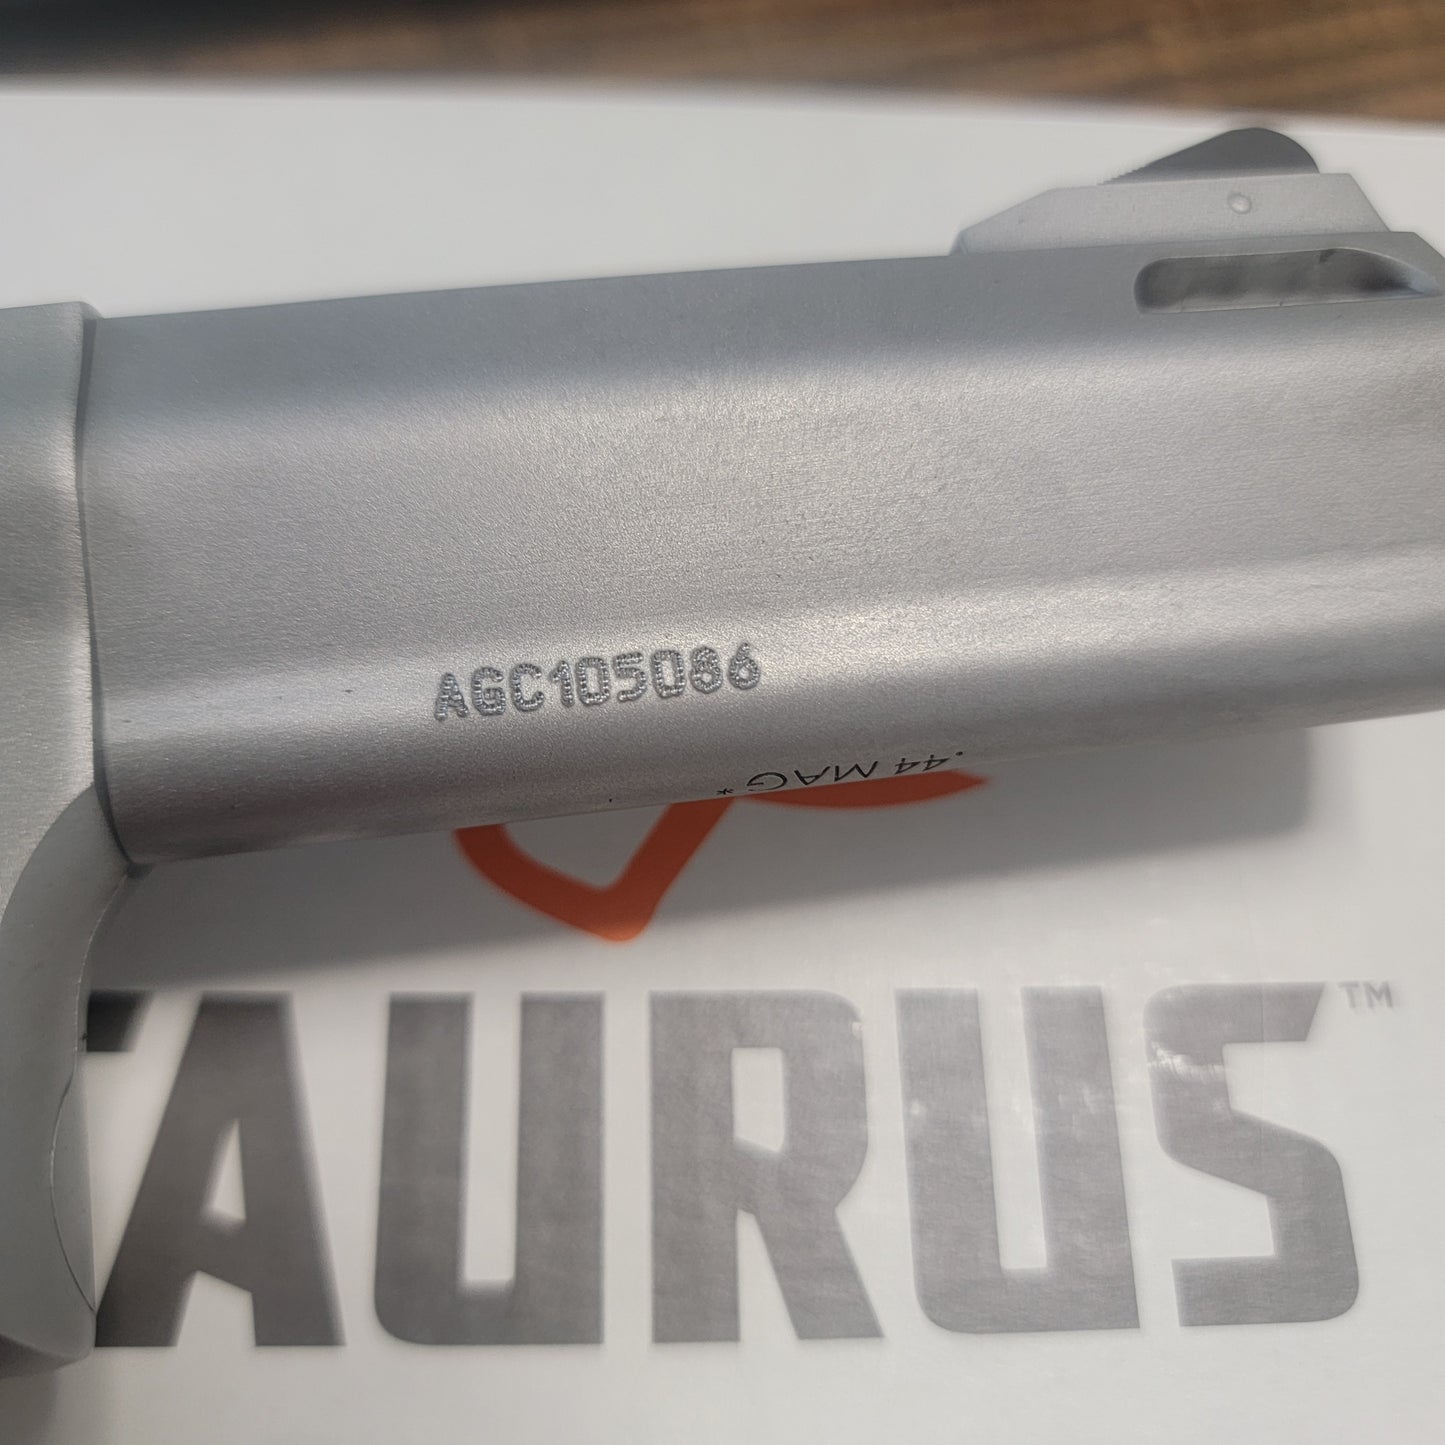 TAURUS TRACKER 44 MAG 4" PORTED 5 RD STAINLESS STEEL